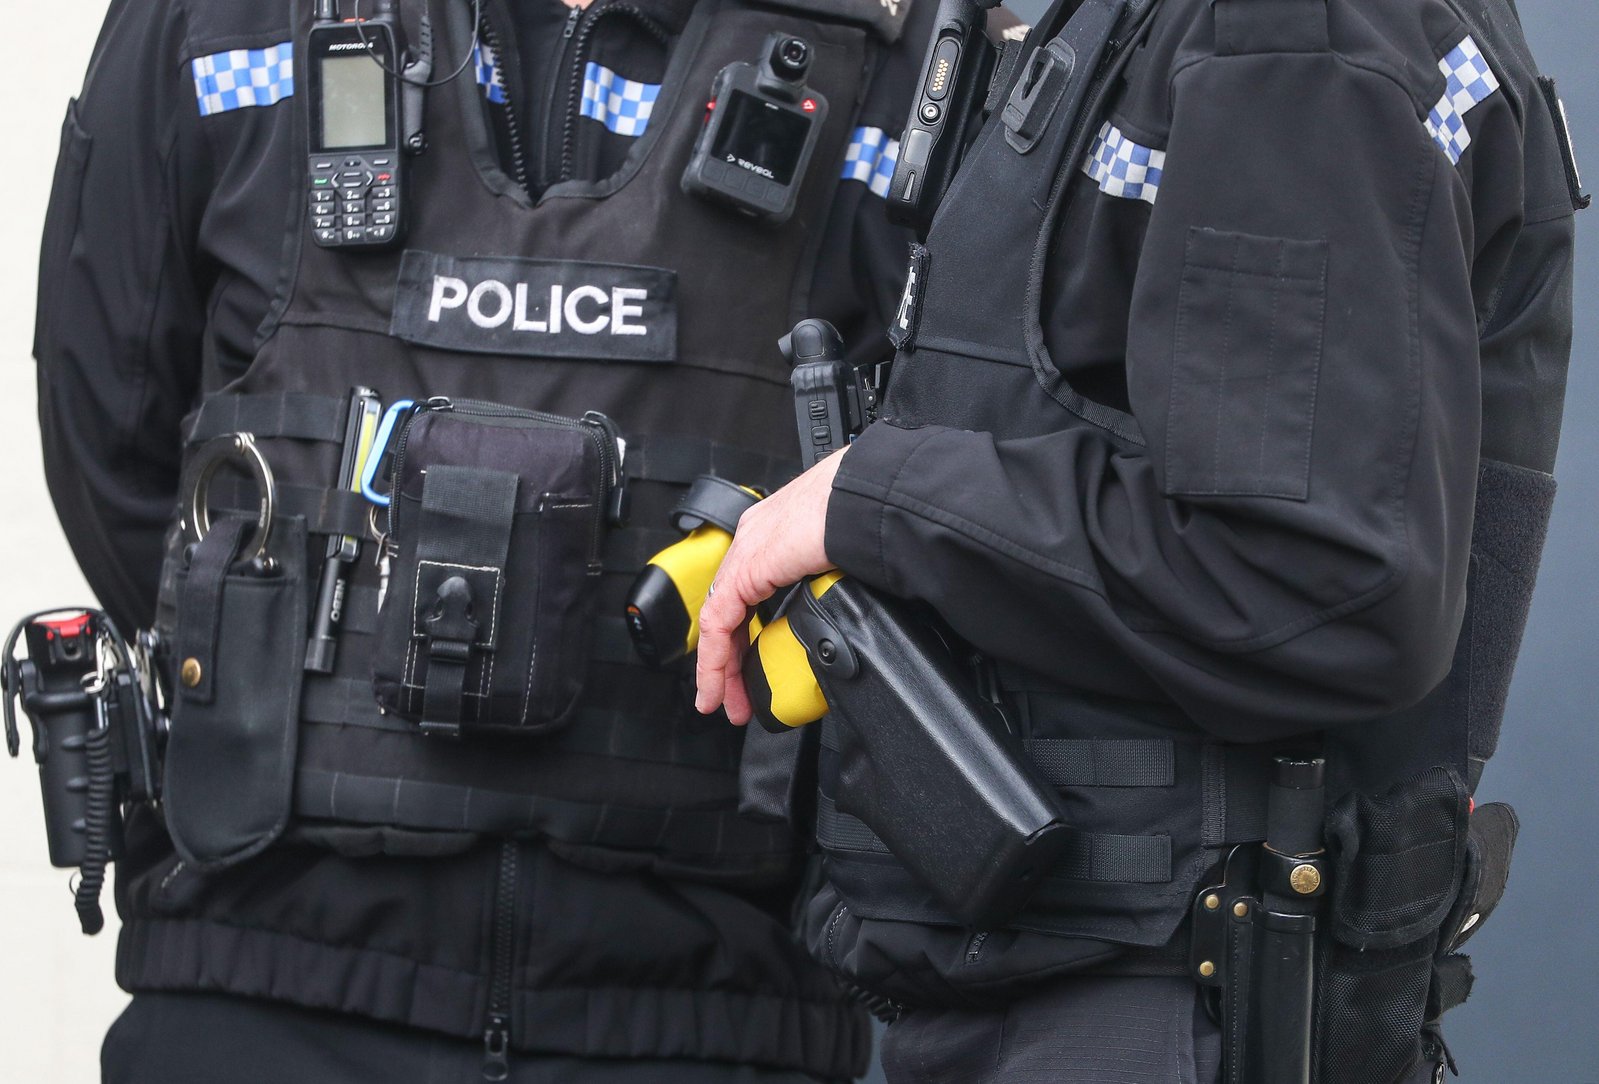 Police across UK equipped with live facial recognition bodycams